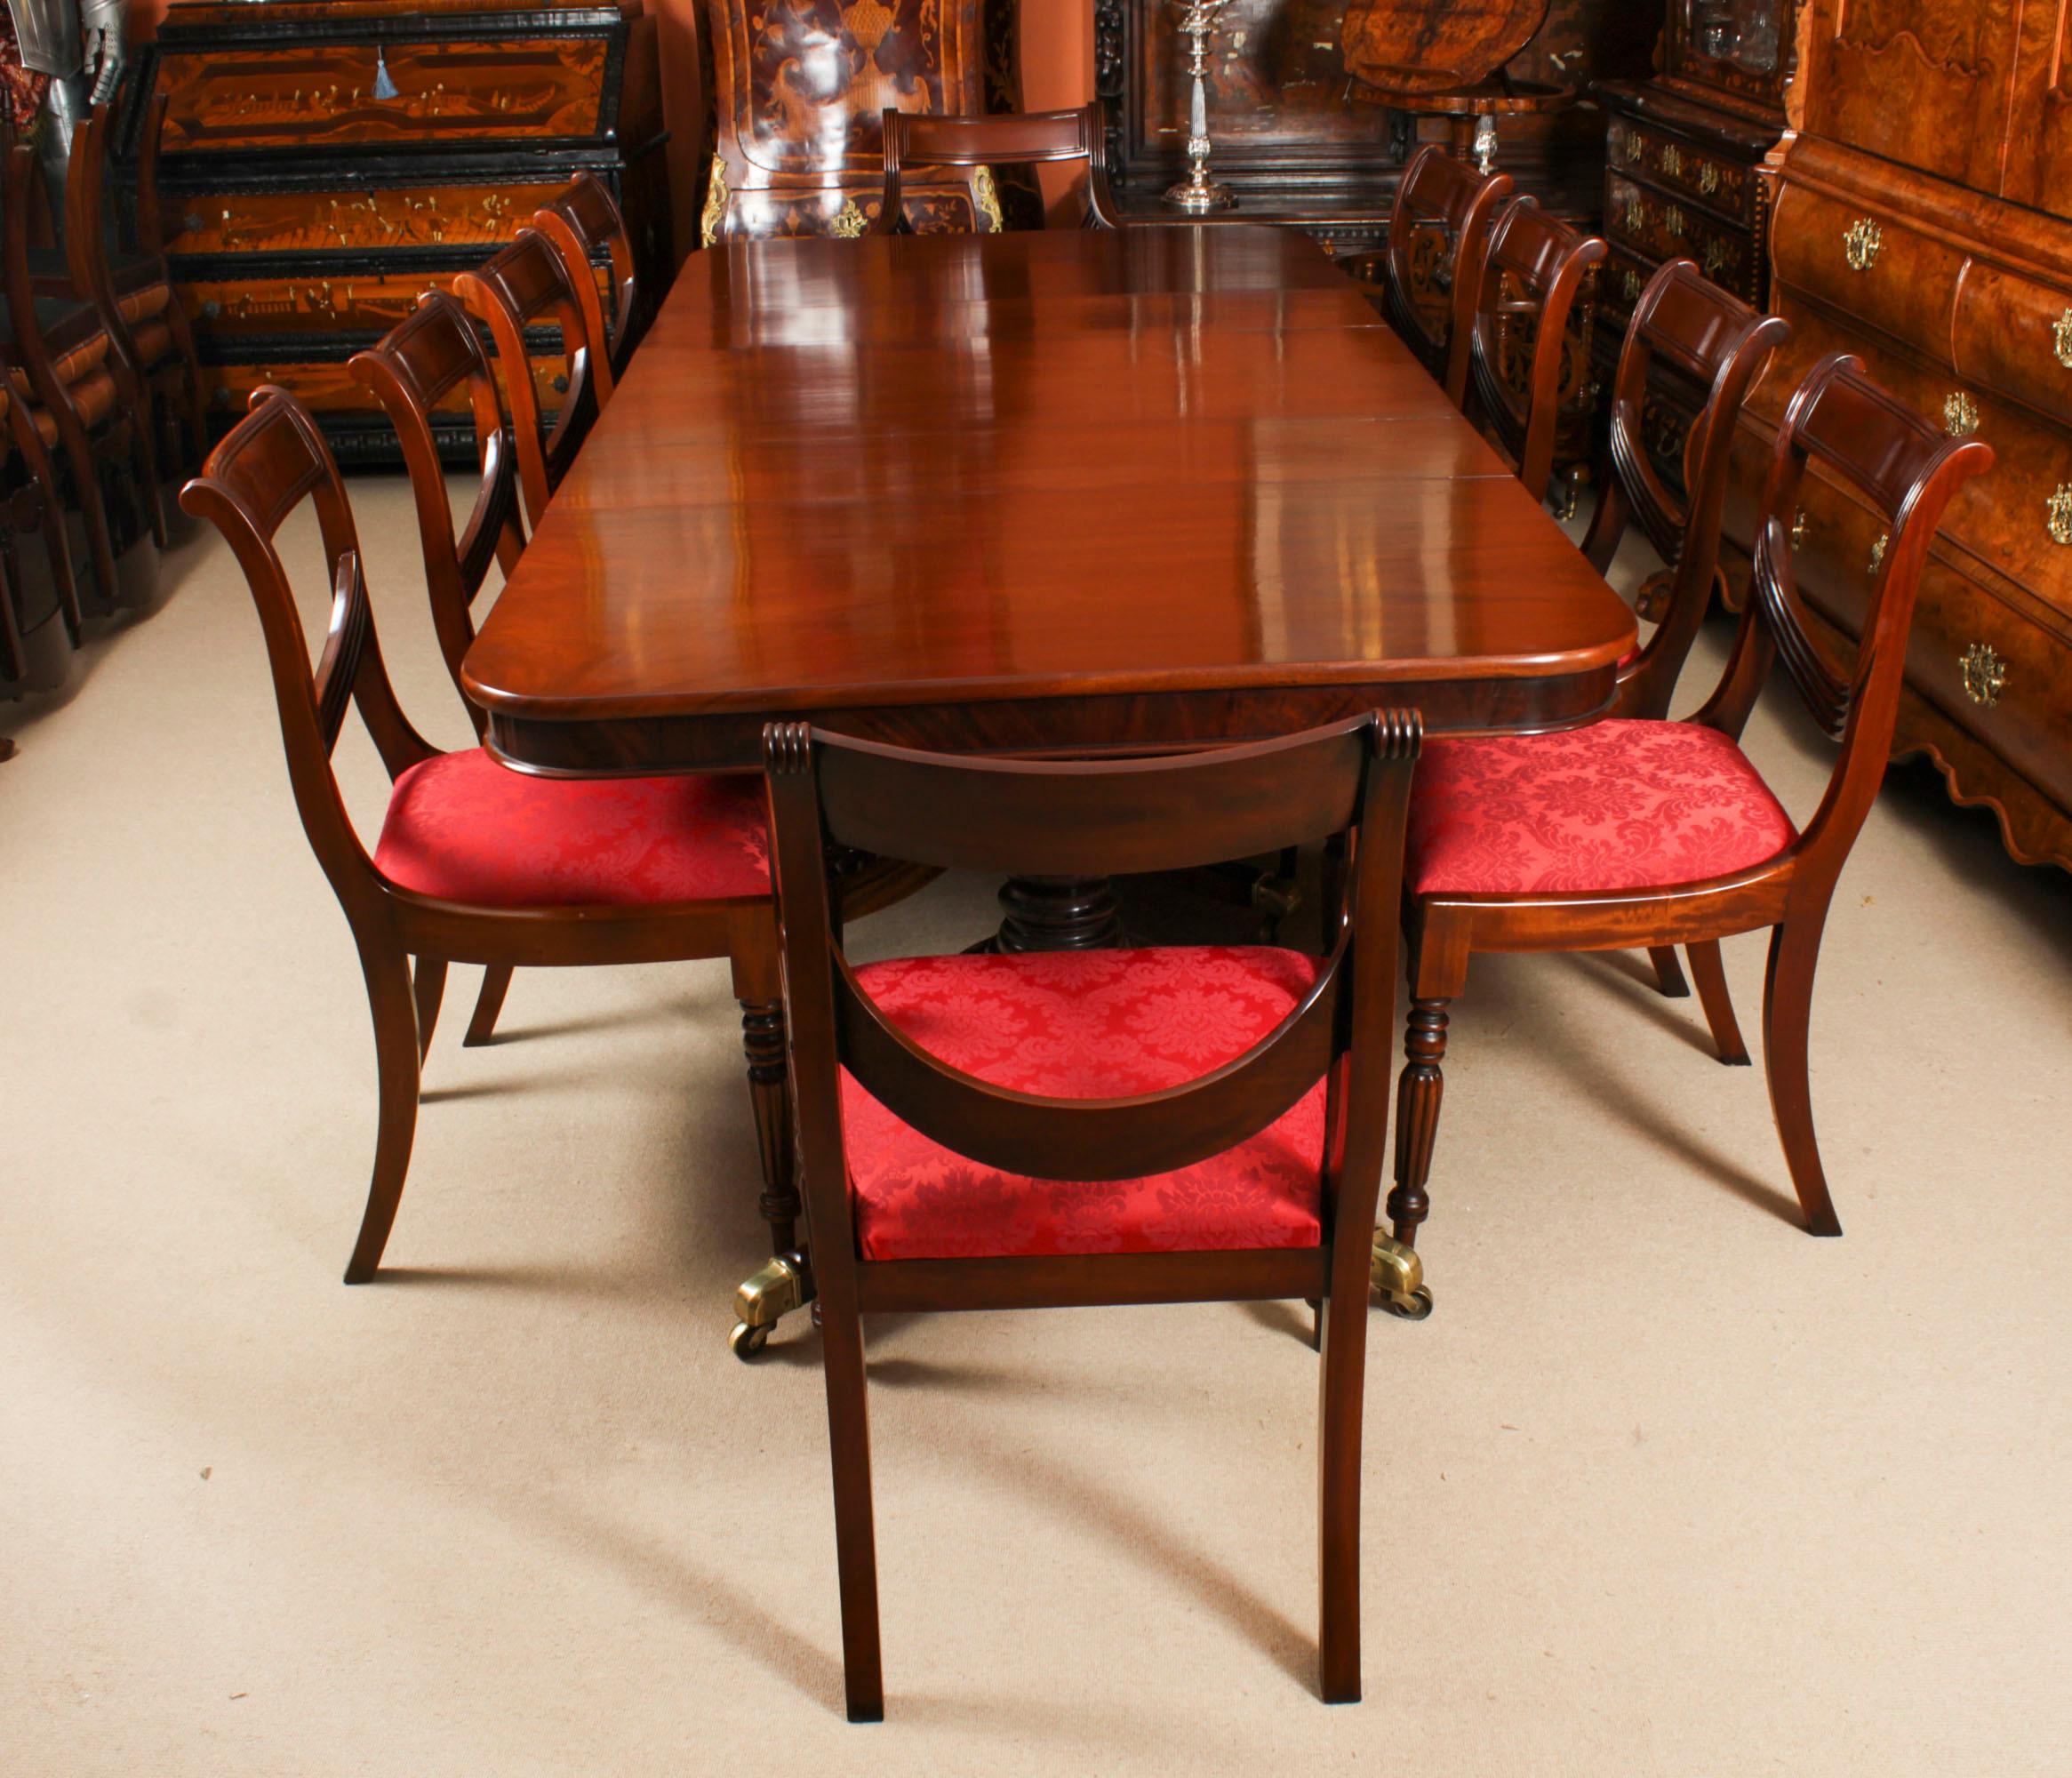 This is a fabulous high quality dining set comprising an antique flame mahogany Regency Period metamorphic triple pillar dining table Circa 1820 in date and a set of ten Regency Revival dining chairs.

The fabulous high quality antique flame